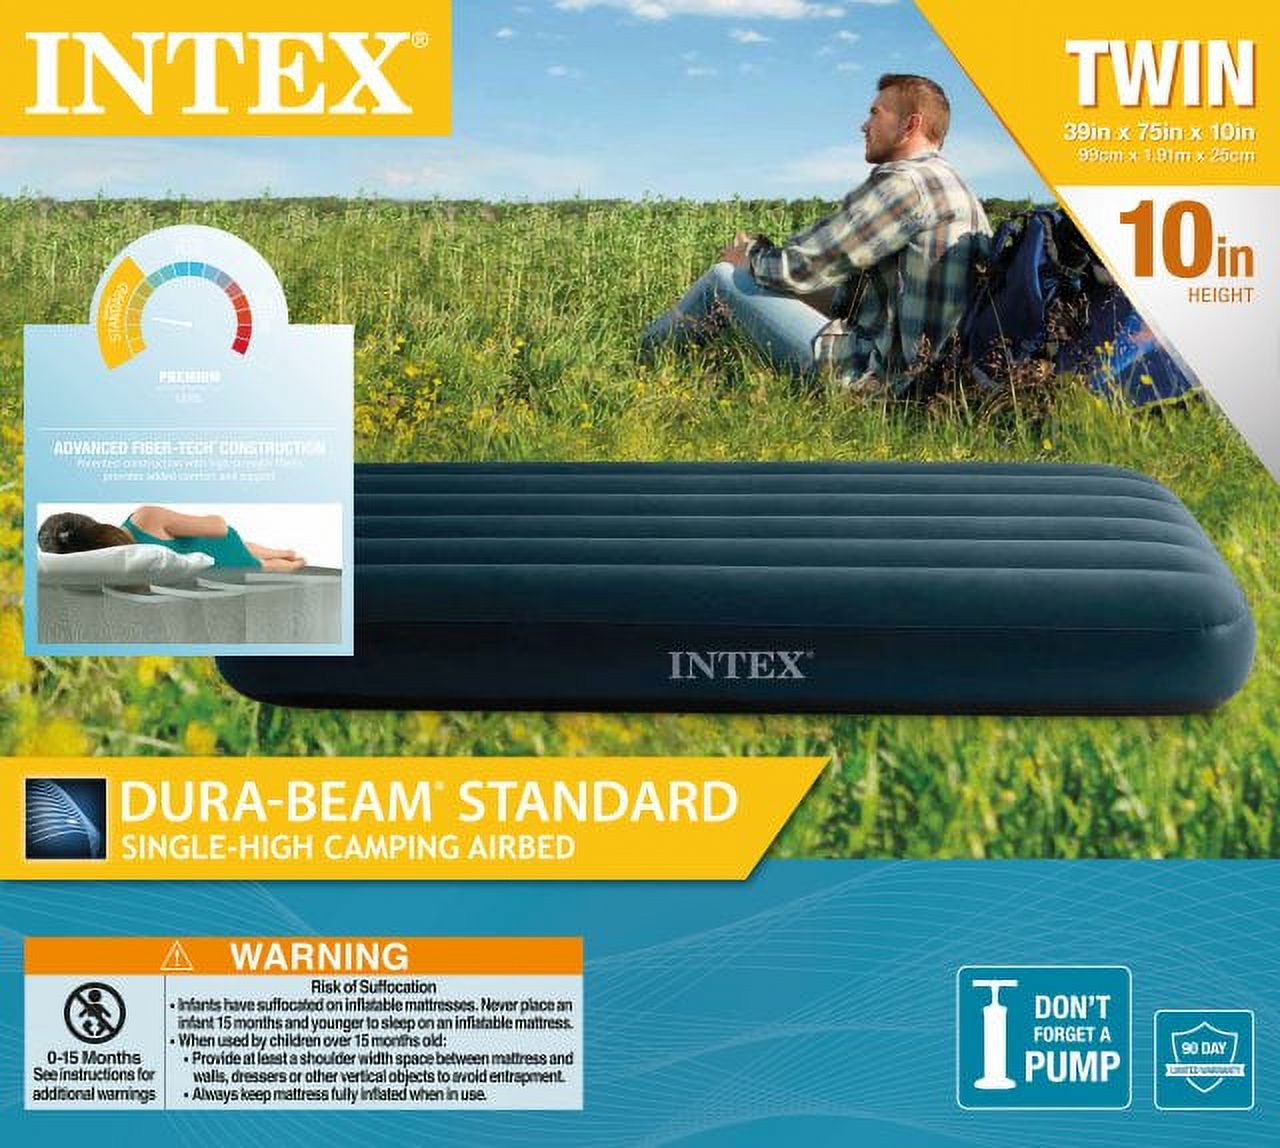 Intex 10in Standard Dura-Beam Airbed Mattress - Pump Not Included - Twin - image 2 of 8